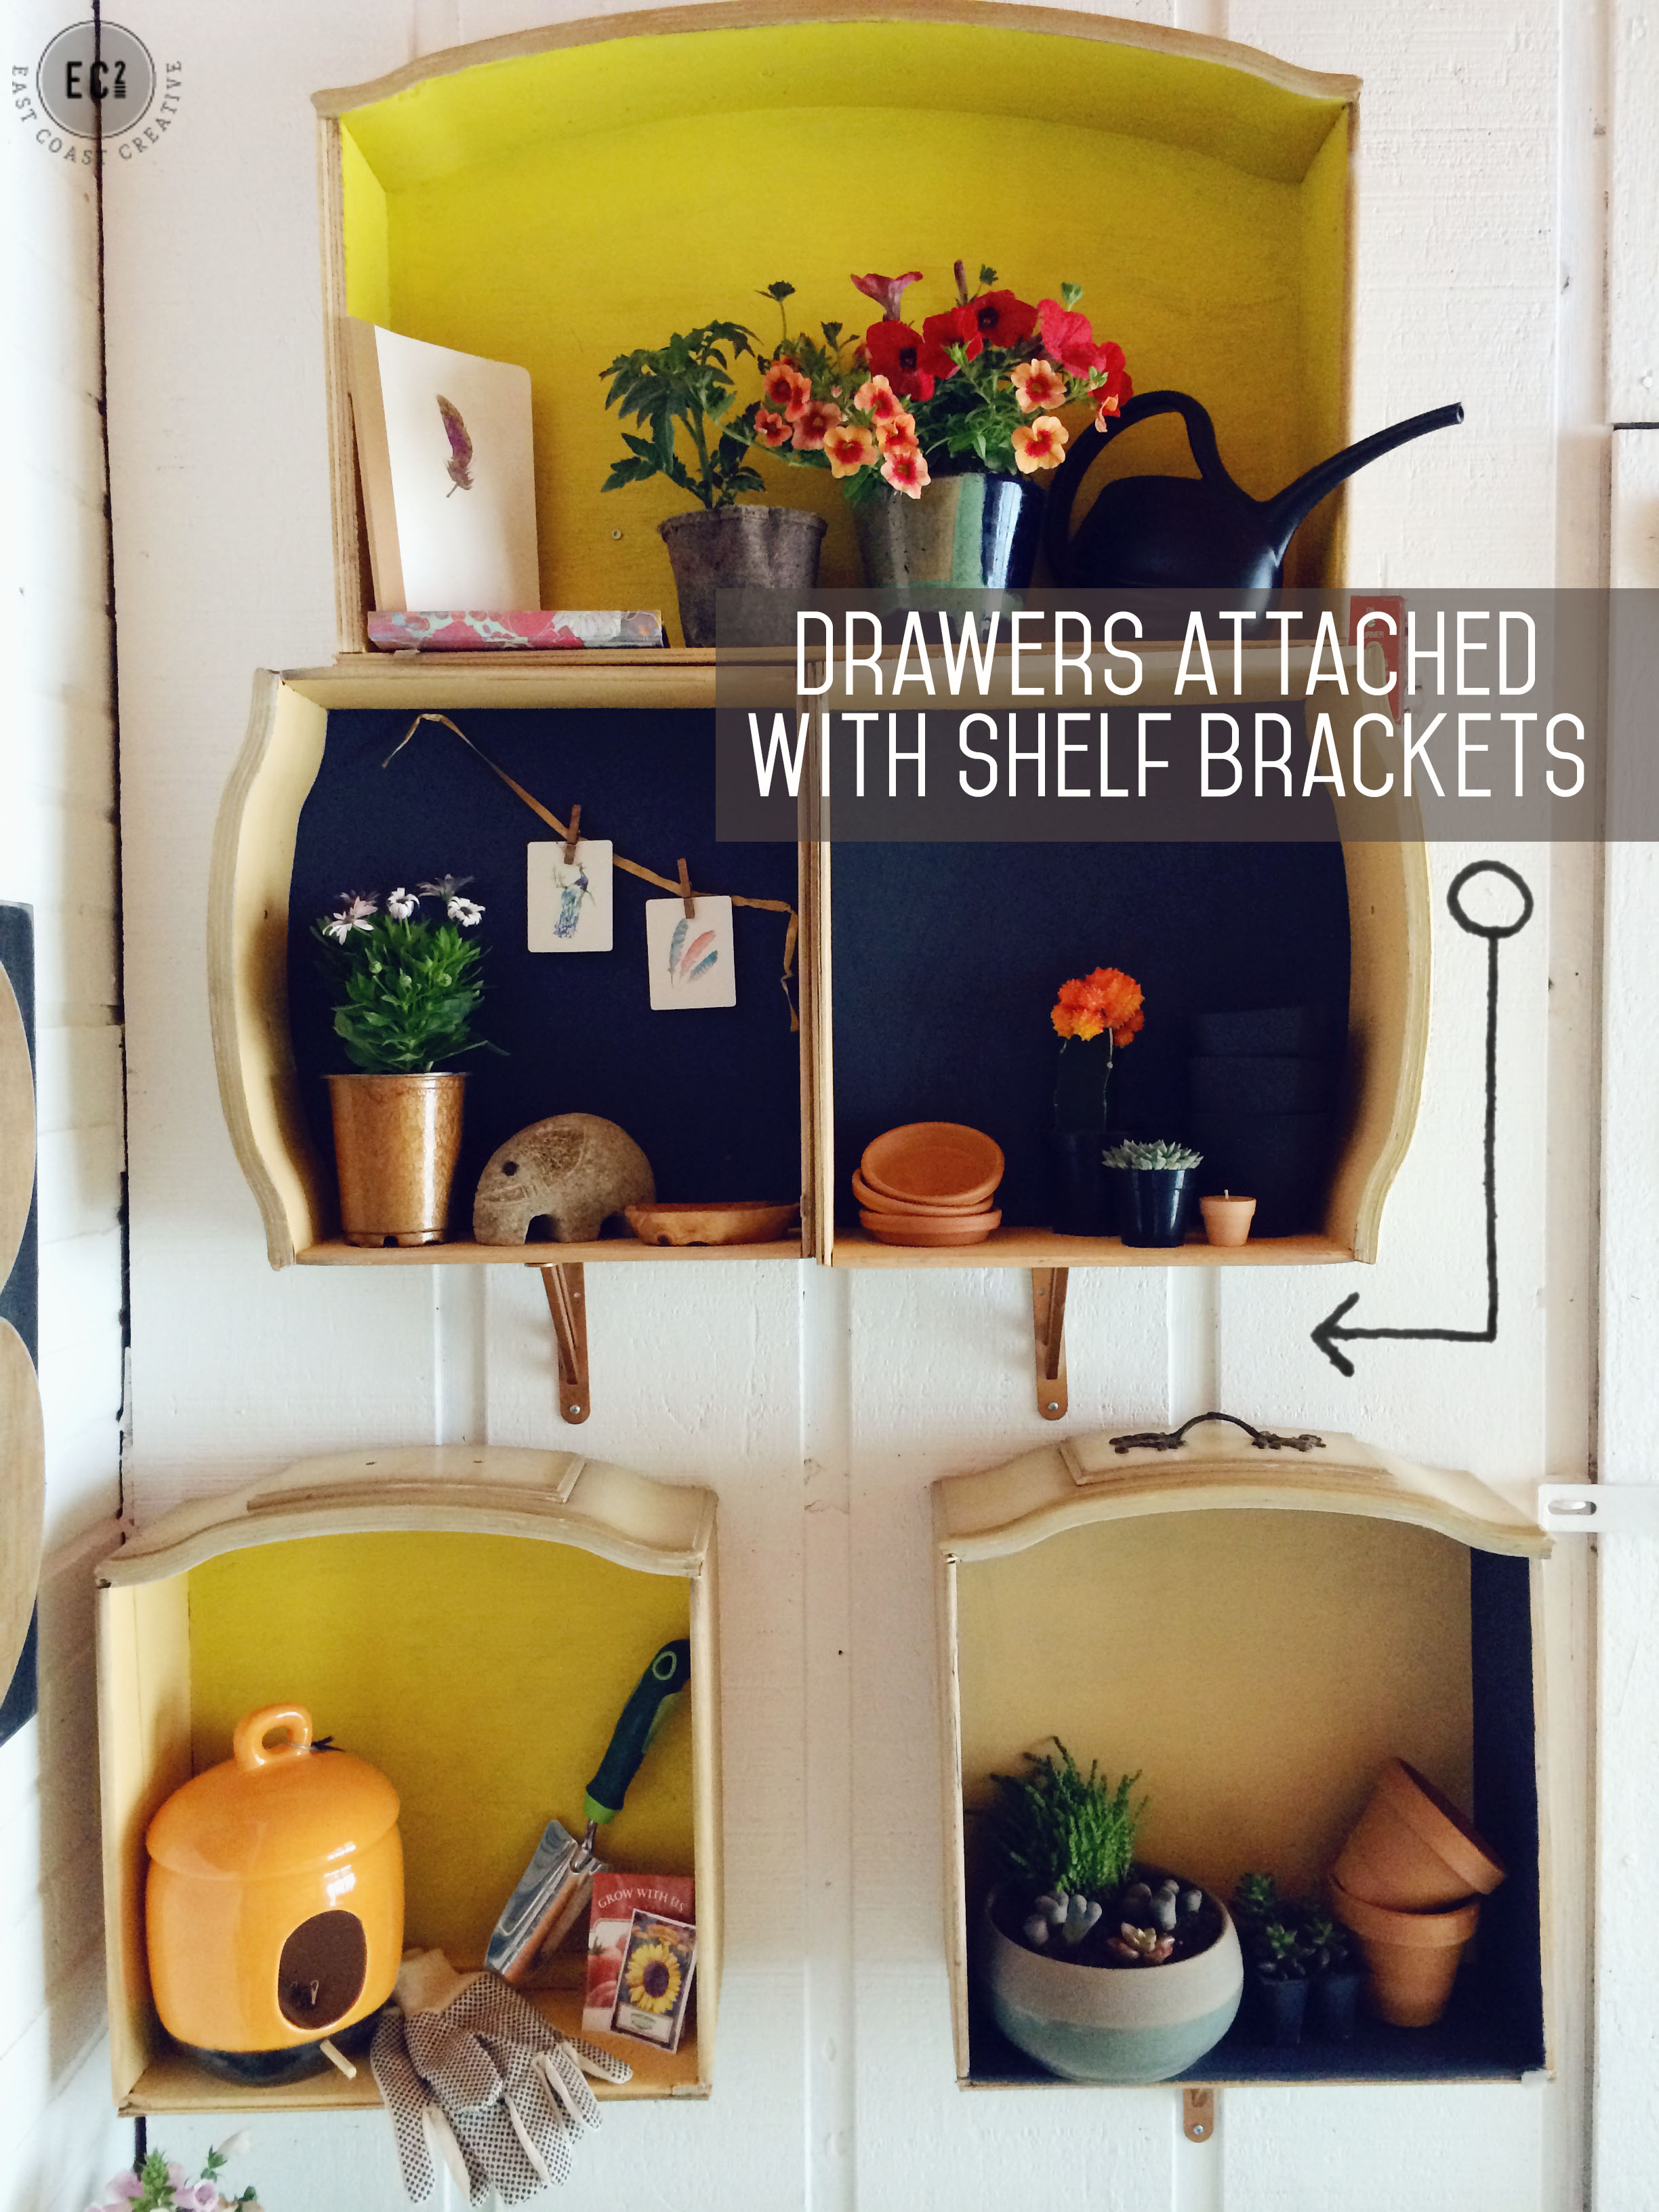 Wall Shelves Out Of Old Dresser Drawers, How To Add Shelves An Old Dresser